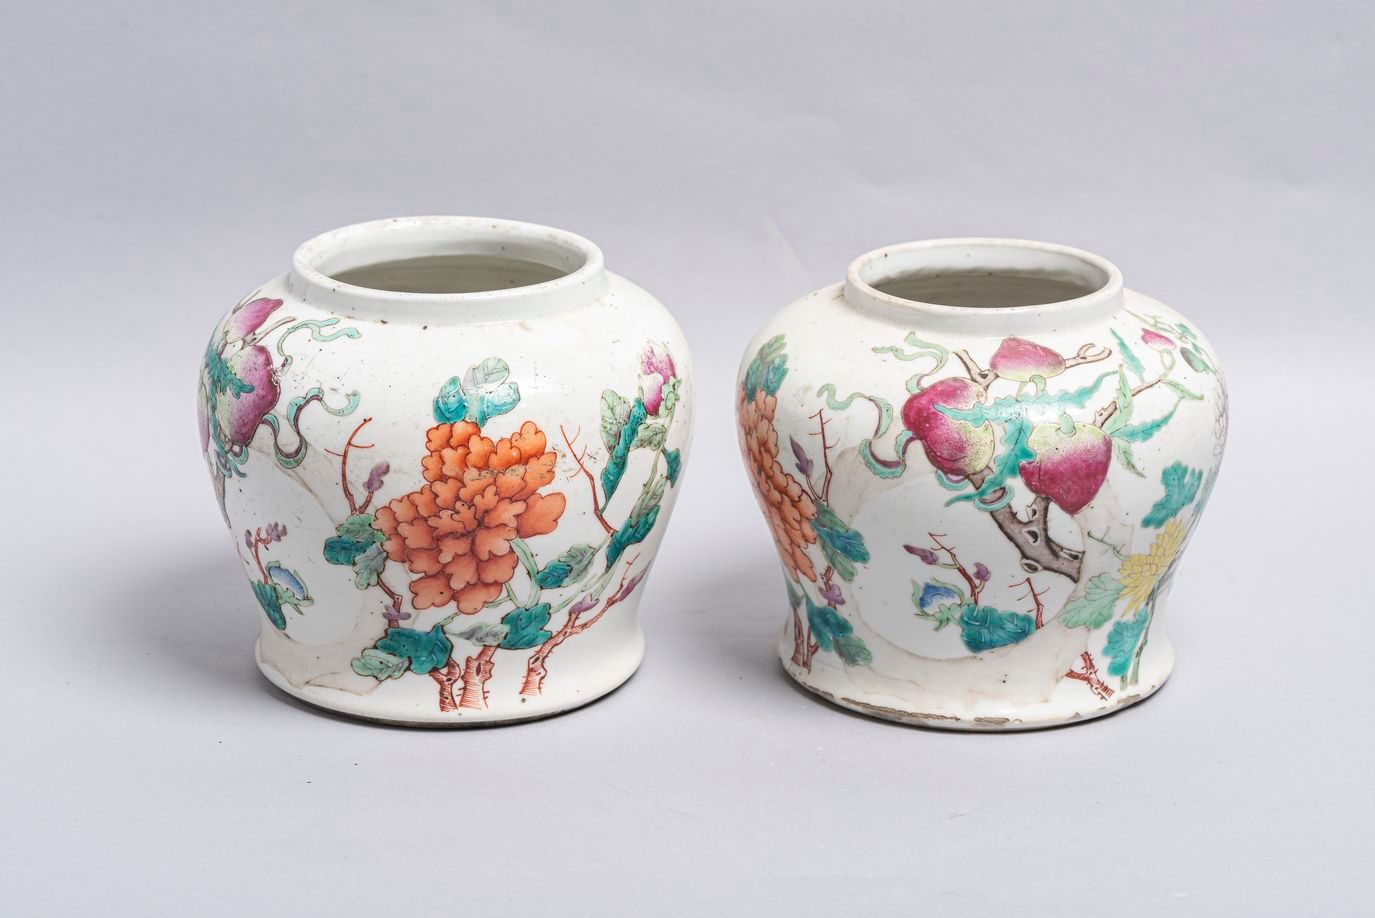 Null 40. A pair of small white porcelain vases, China, circa 1900, decorated wit&hellip;